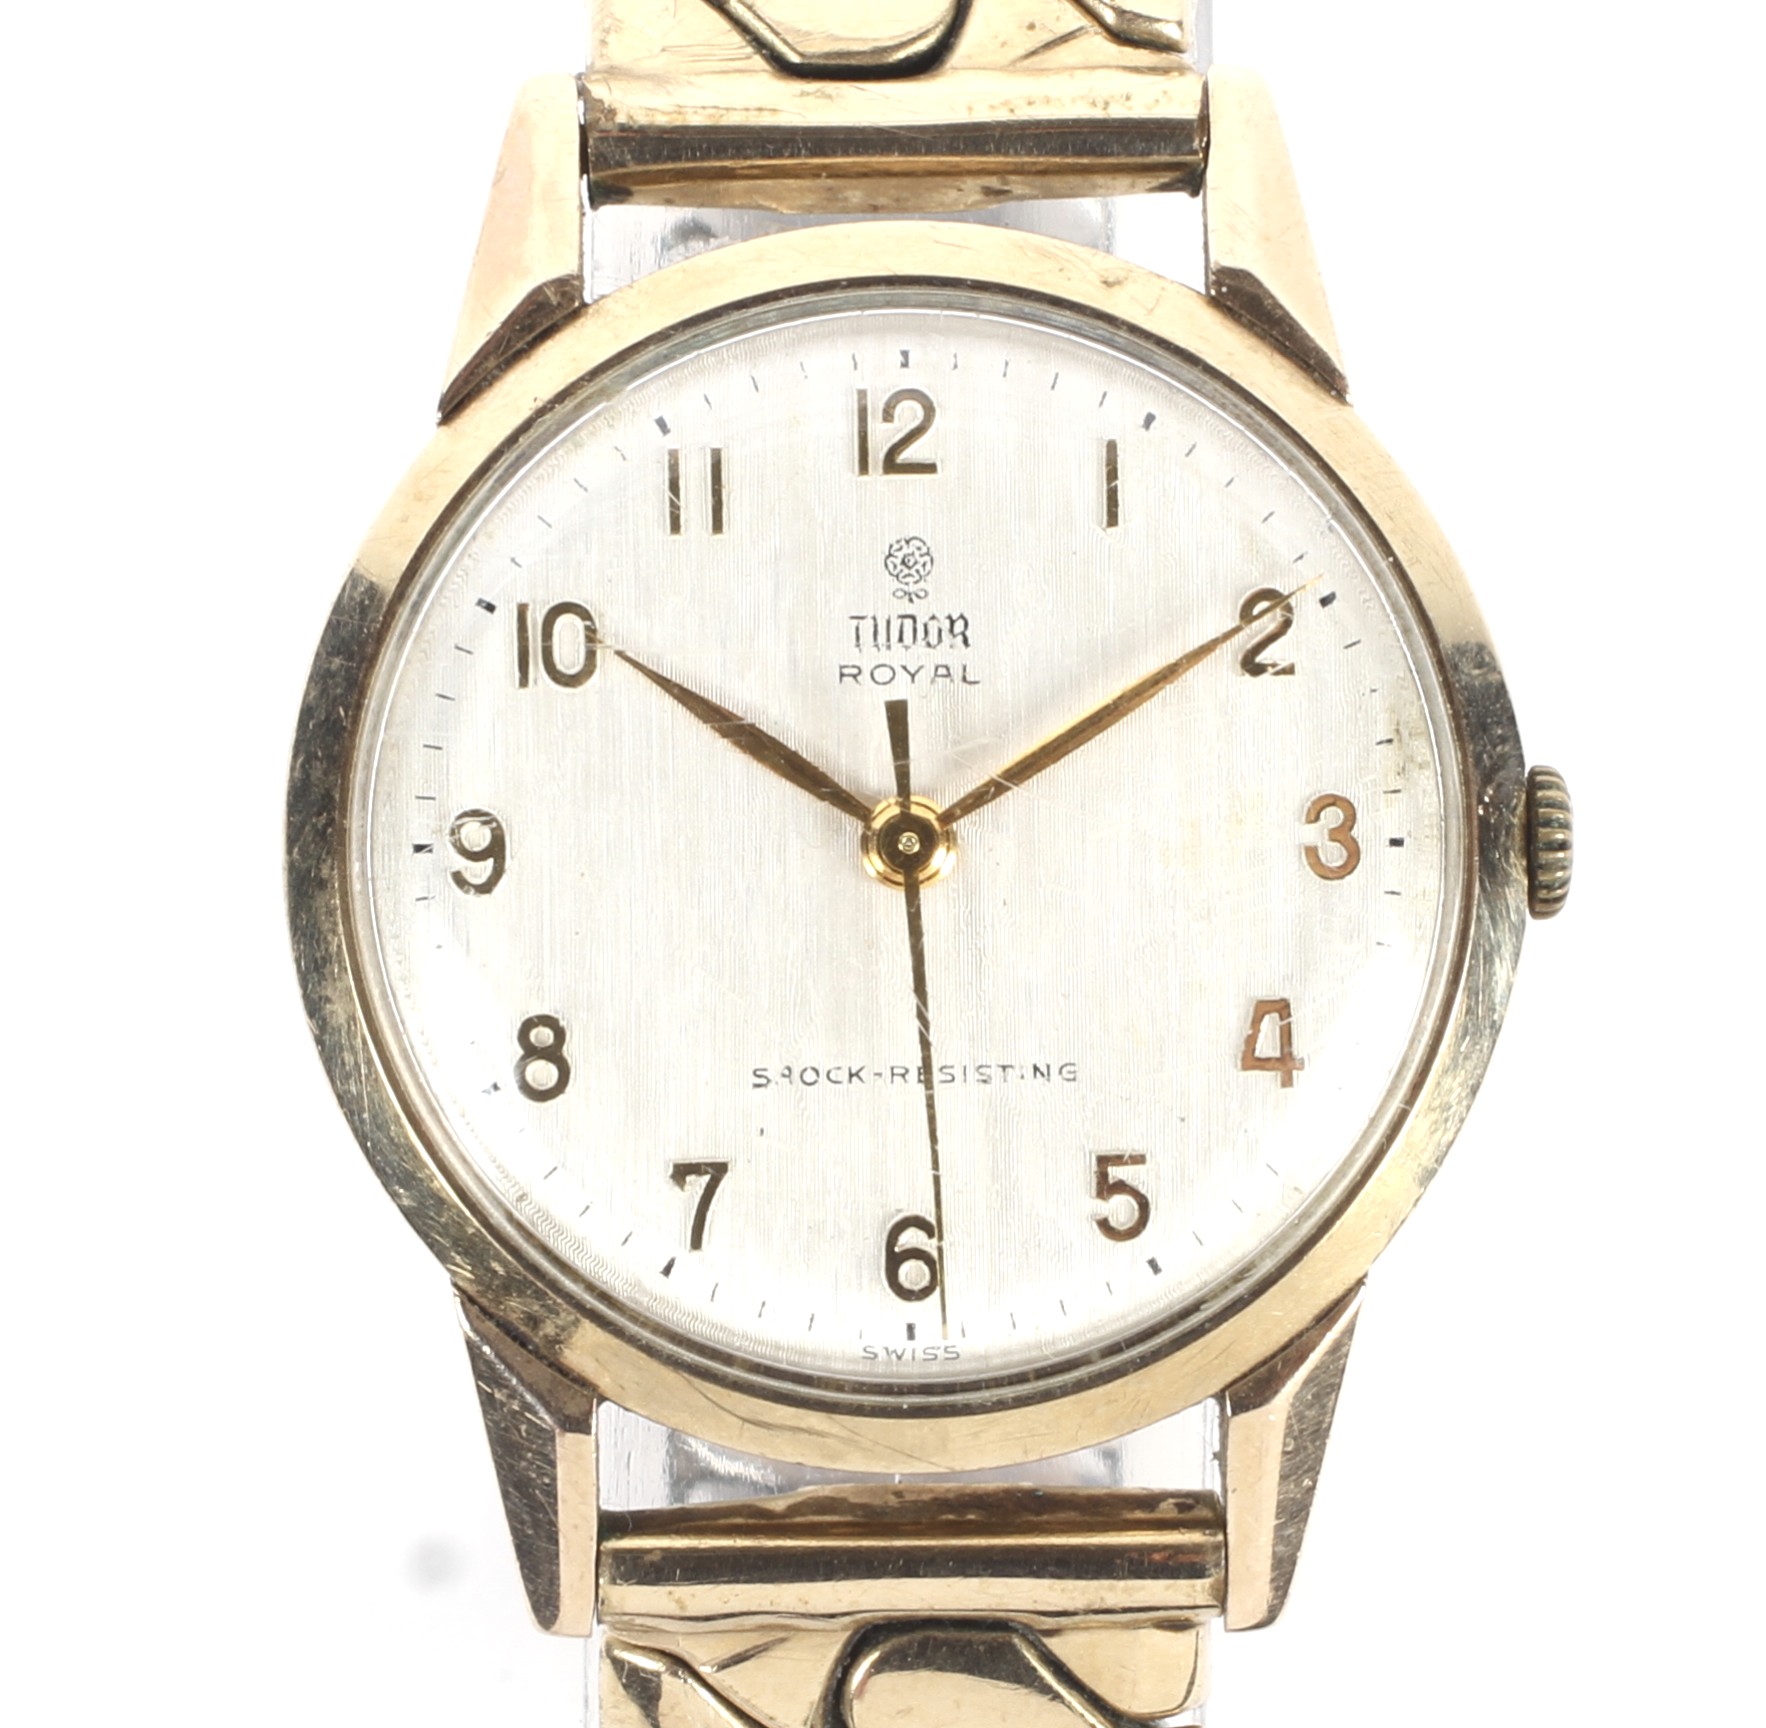 A gentlemans 9ct gold cased Tudor Royal manual wind wristwatch.